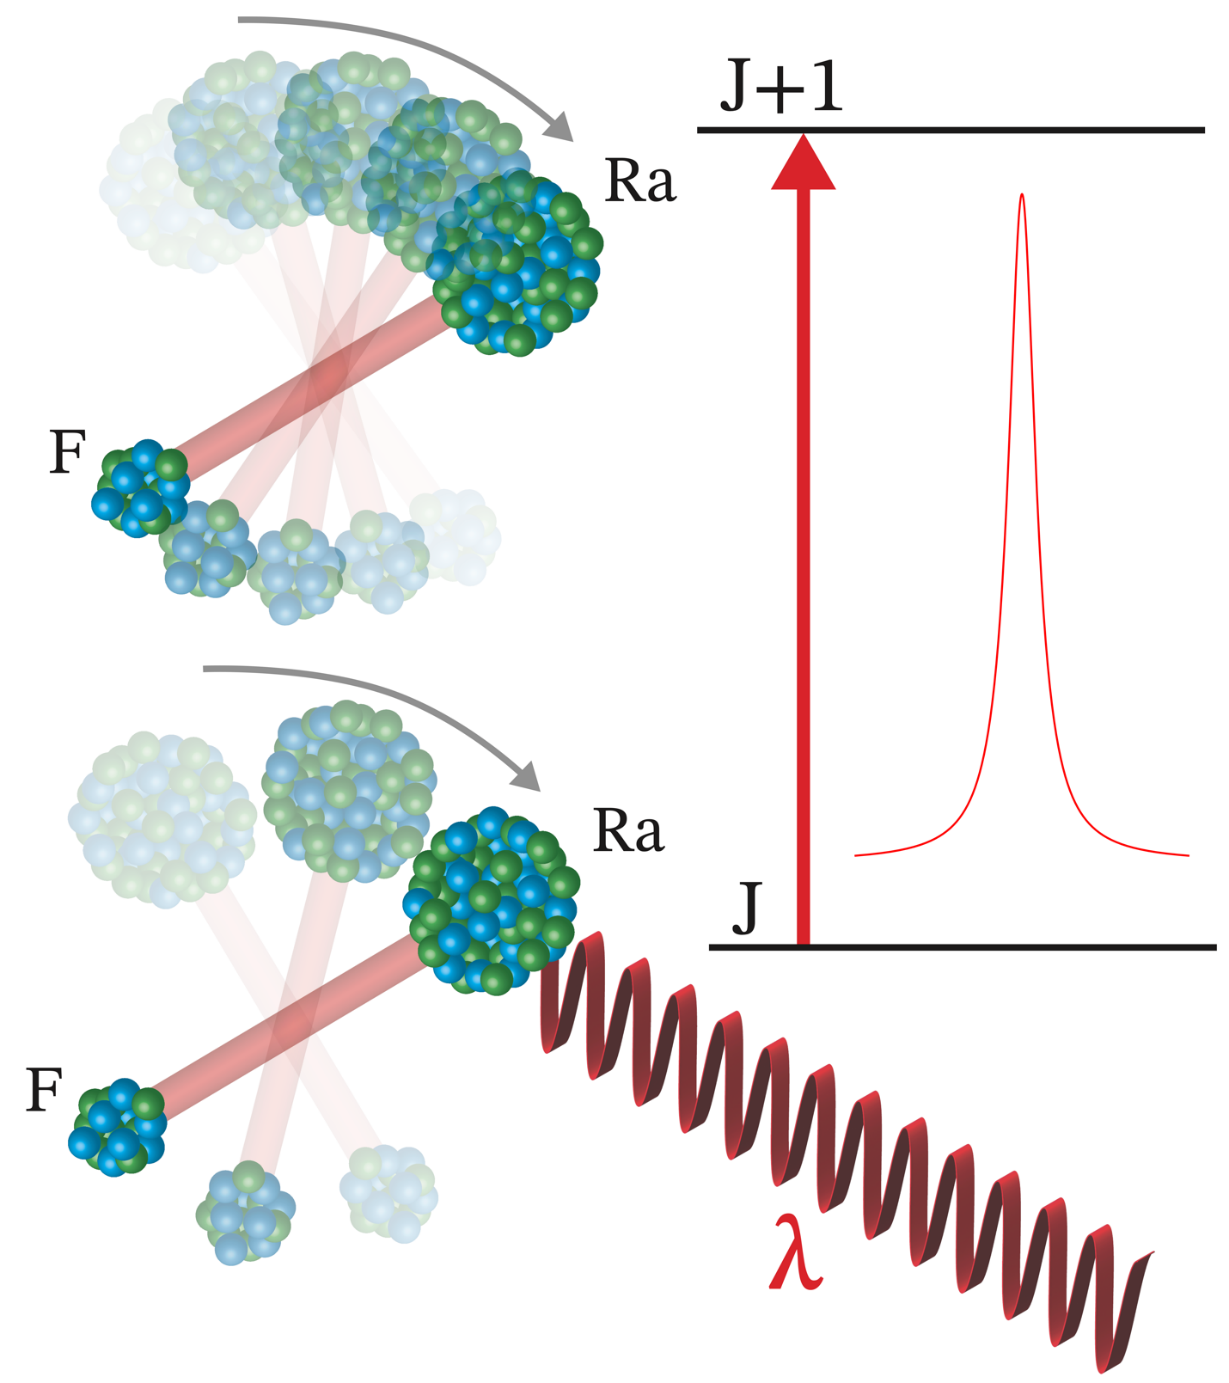 Using lasers with precisely tuned frequency, λ, physicists control rotational states of radium monofluoride molecules and excite specific rotational levels, characterized by the quantum number, J. These excitations manifest as sharp spectral peaks.